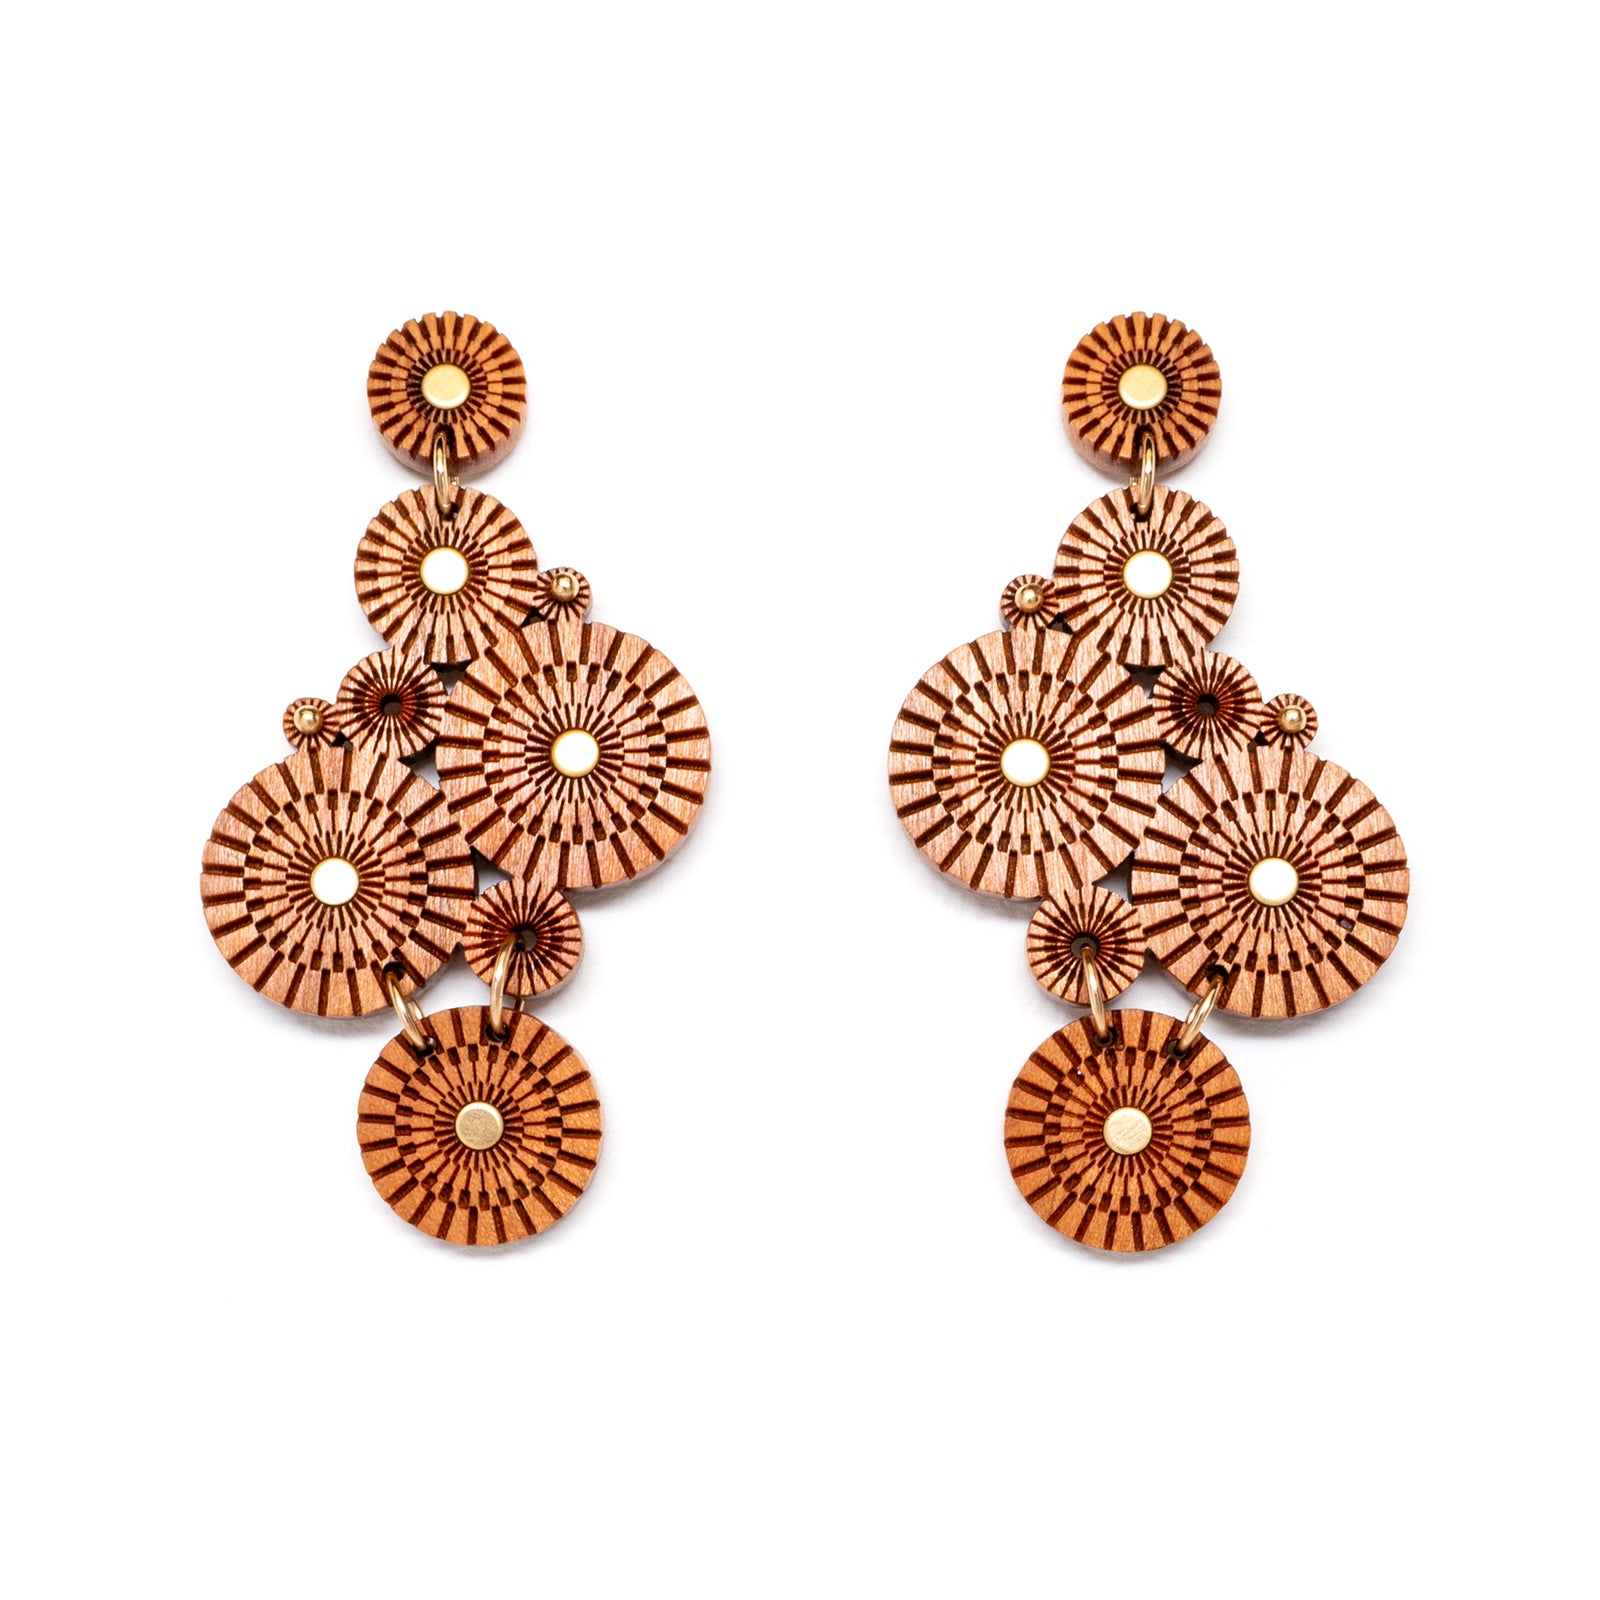 Statement earrings made of various size laser carved circles, with brass accents, flat view.